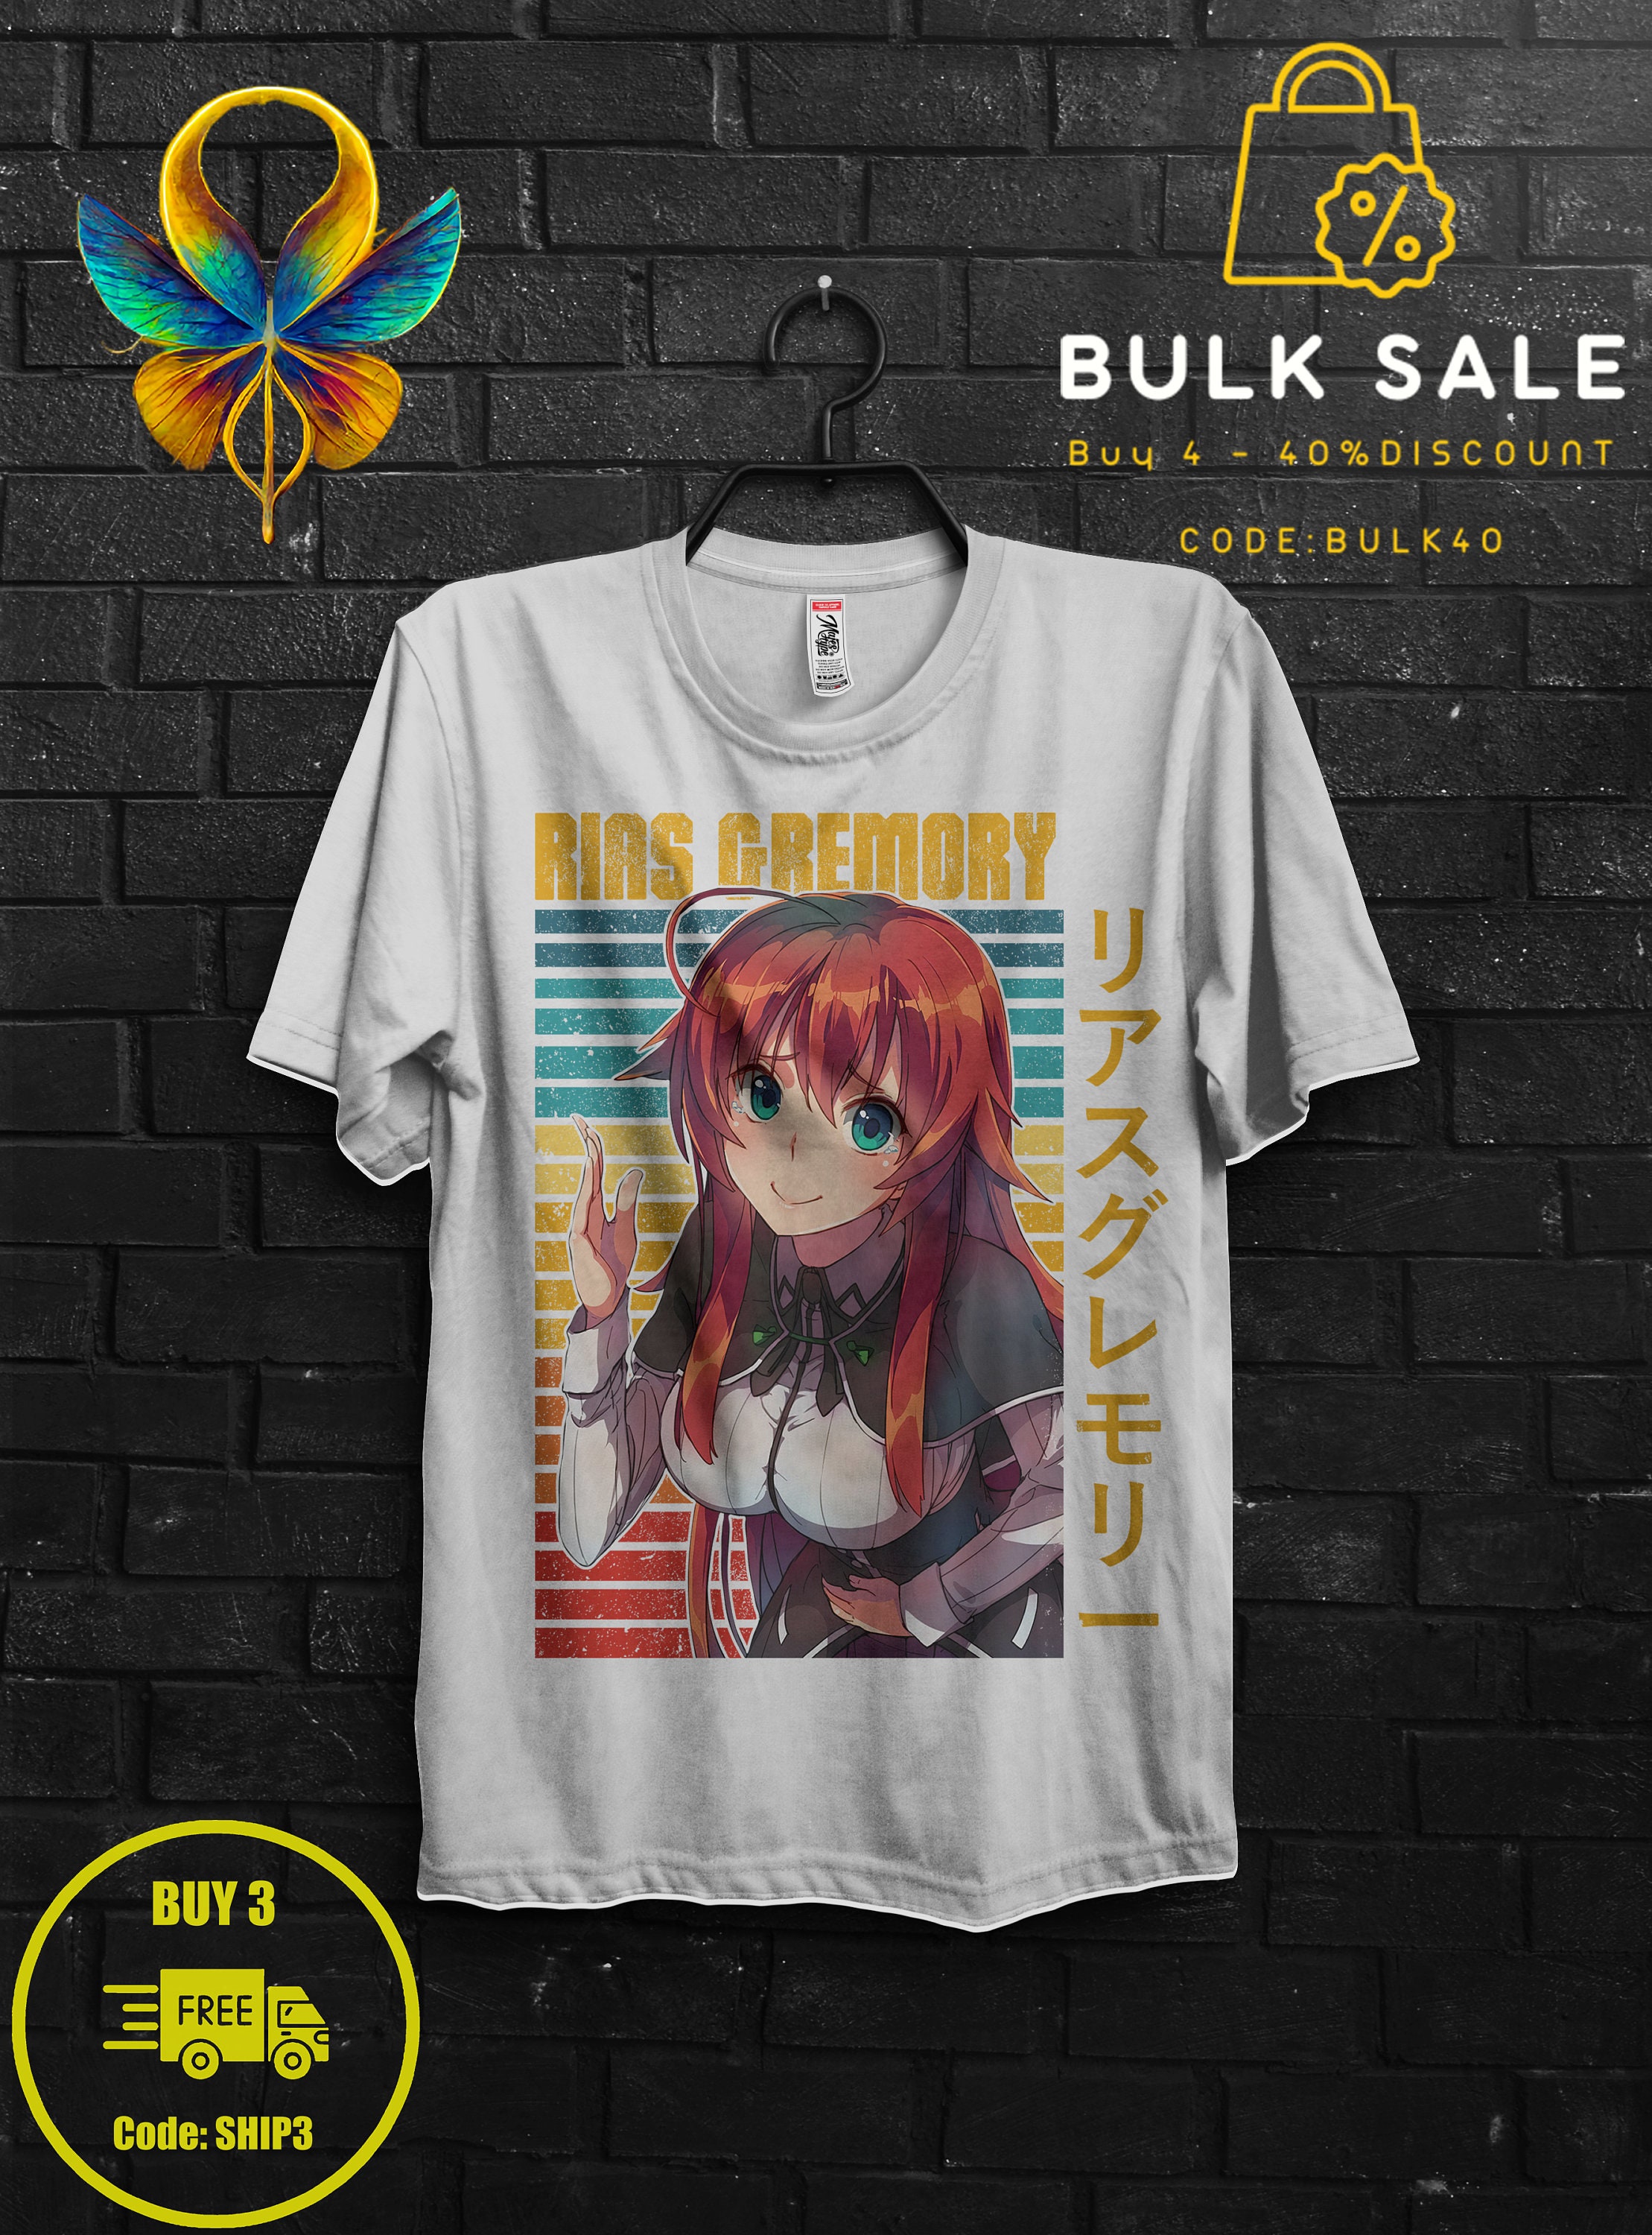 Rias Gremory Shirt Anime Gift Cosplay For Girl,Issei Hyoudou Sweat,Rossweisse Tshirt For Sitri,Xenovia Appareal For Her,High School DxD Tee 1600247823